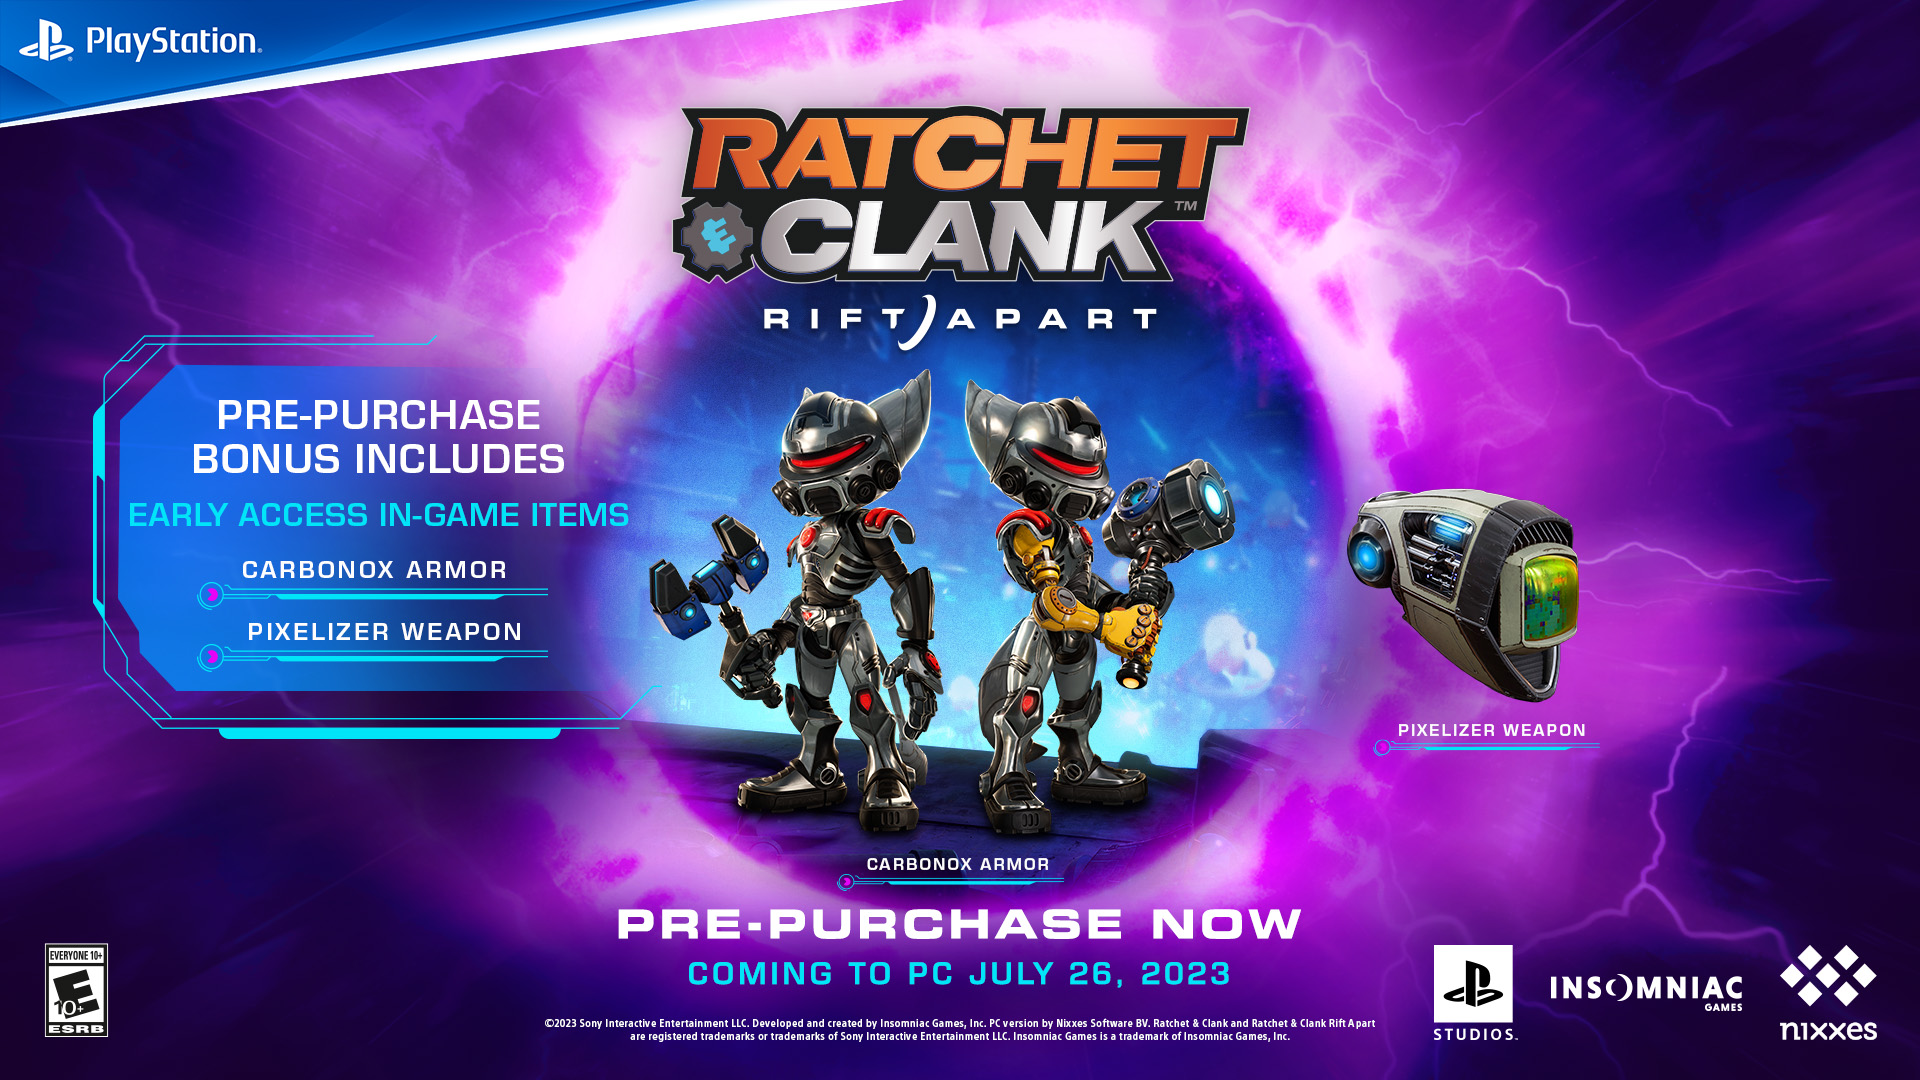 Ratchet & Clank: Rift Apart is now available on PC! Take on